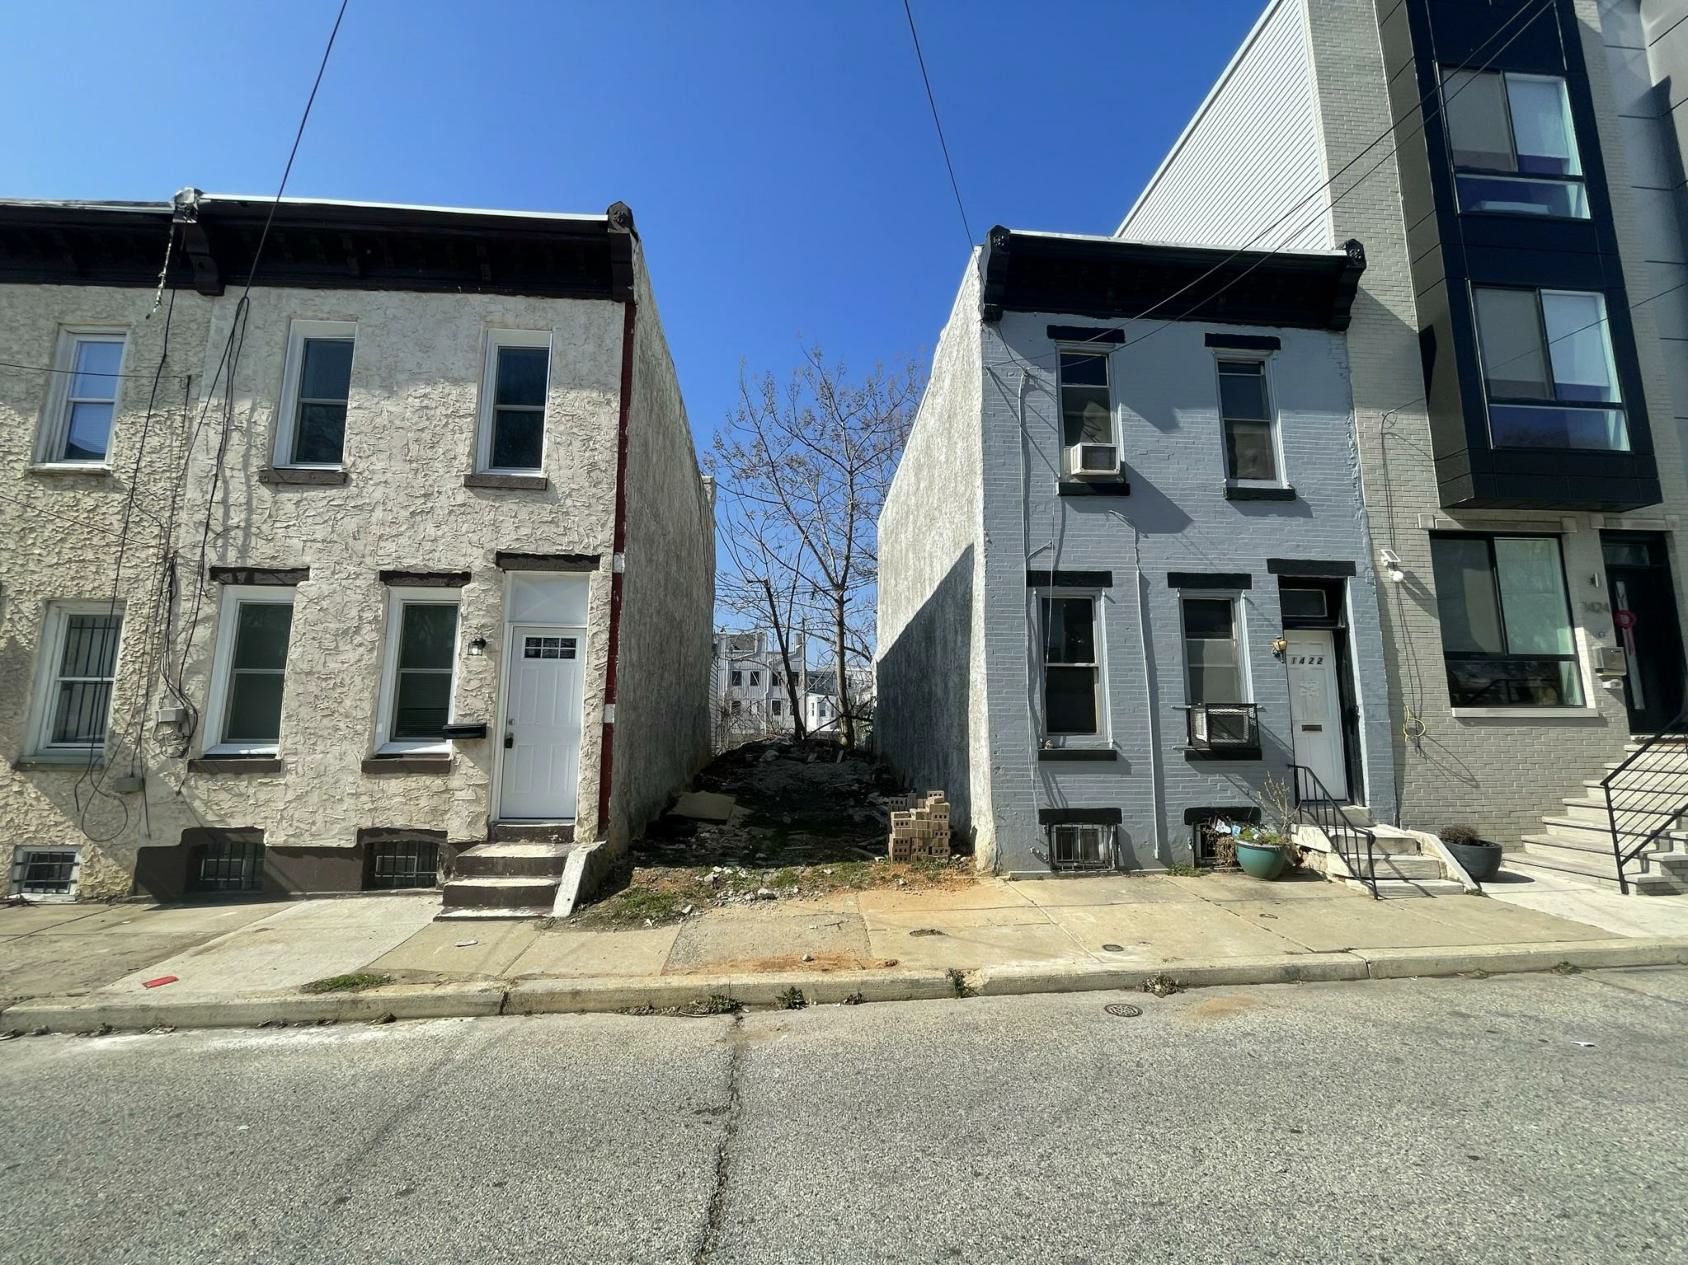 1420 North Etting Street. Site conditions prior to redevelopment. Looking west. Credit: Moto Designshop via the City of Philadelphia